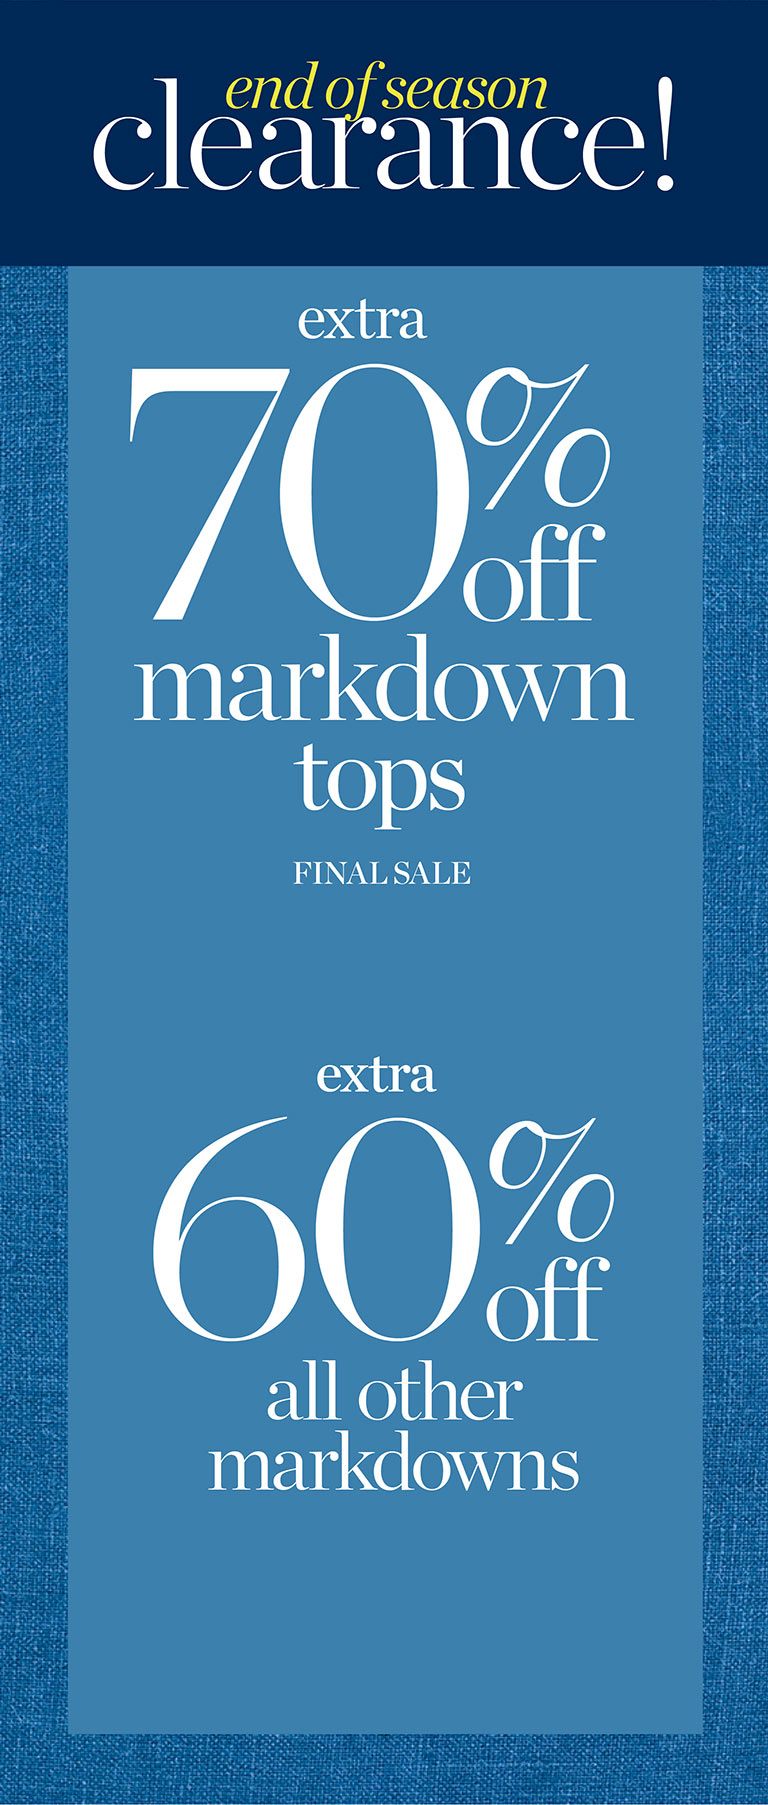 End of season clearance! Extra 70% off markdown tops. Final sale. Extra 60% off all other markdowns.